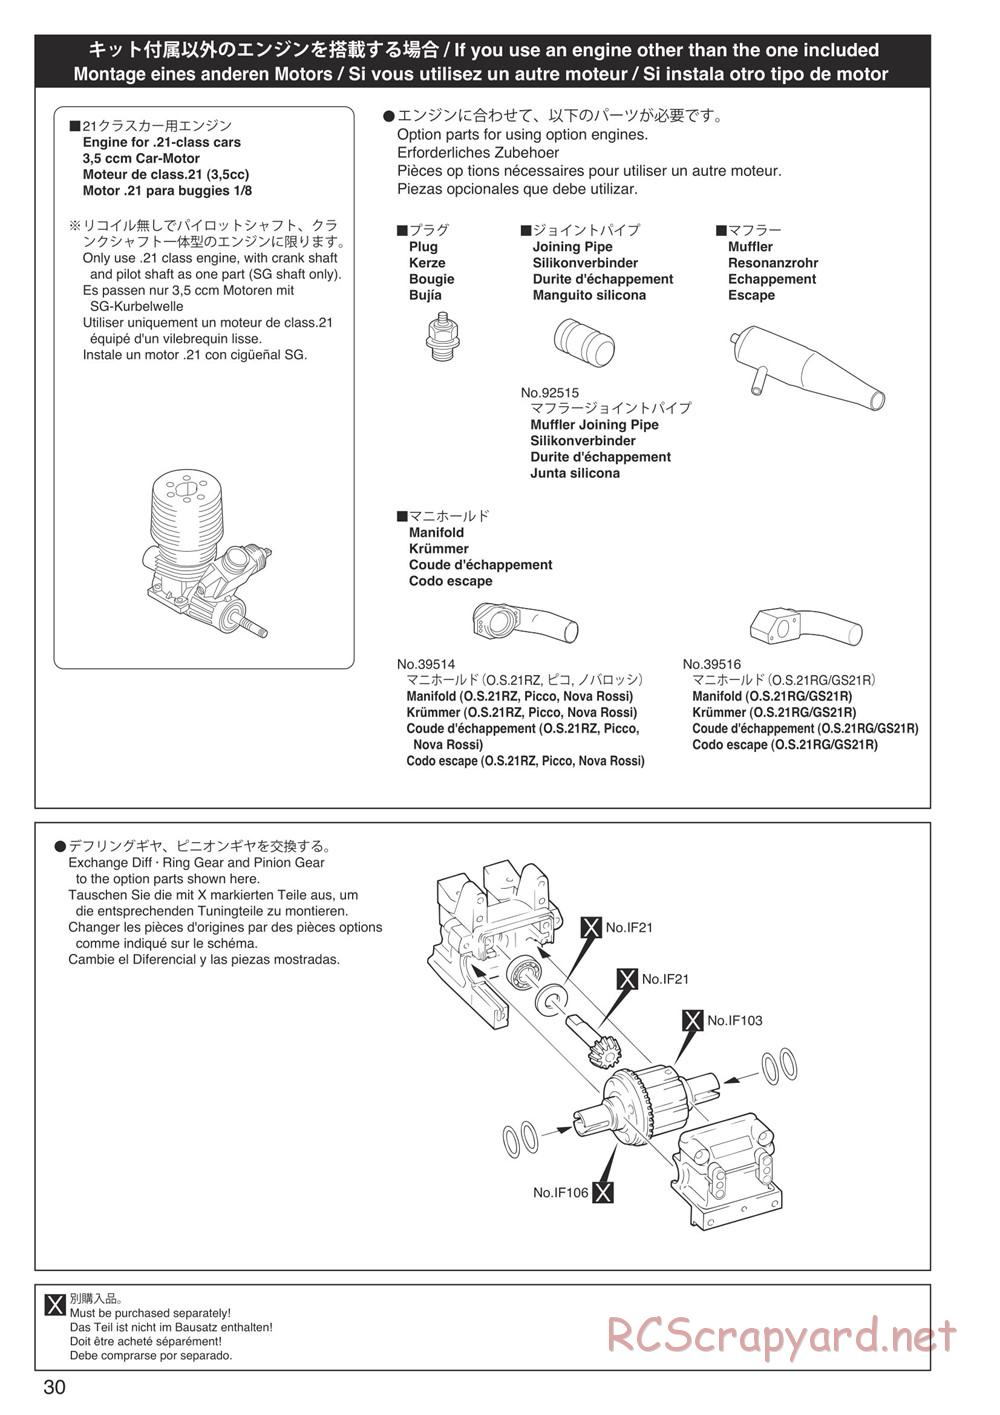 Kyosho - Inferno Neo - Manual - Page 30